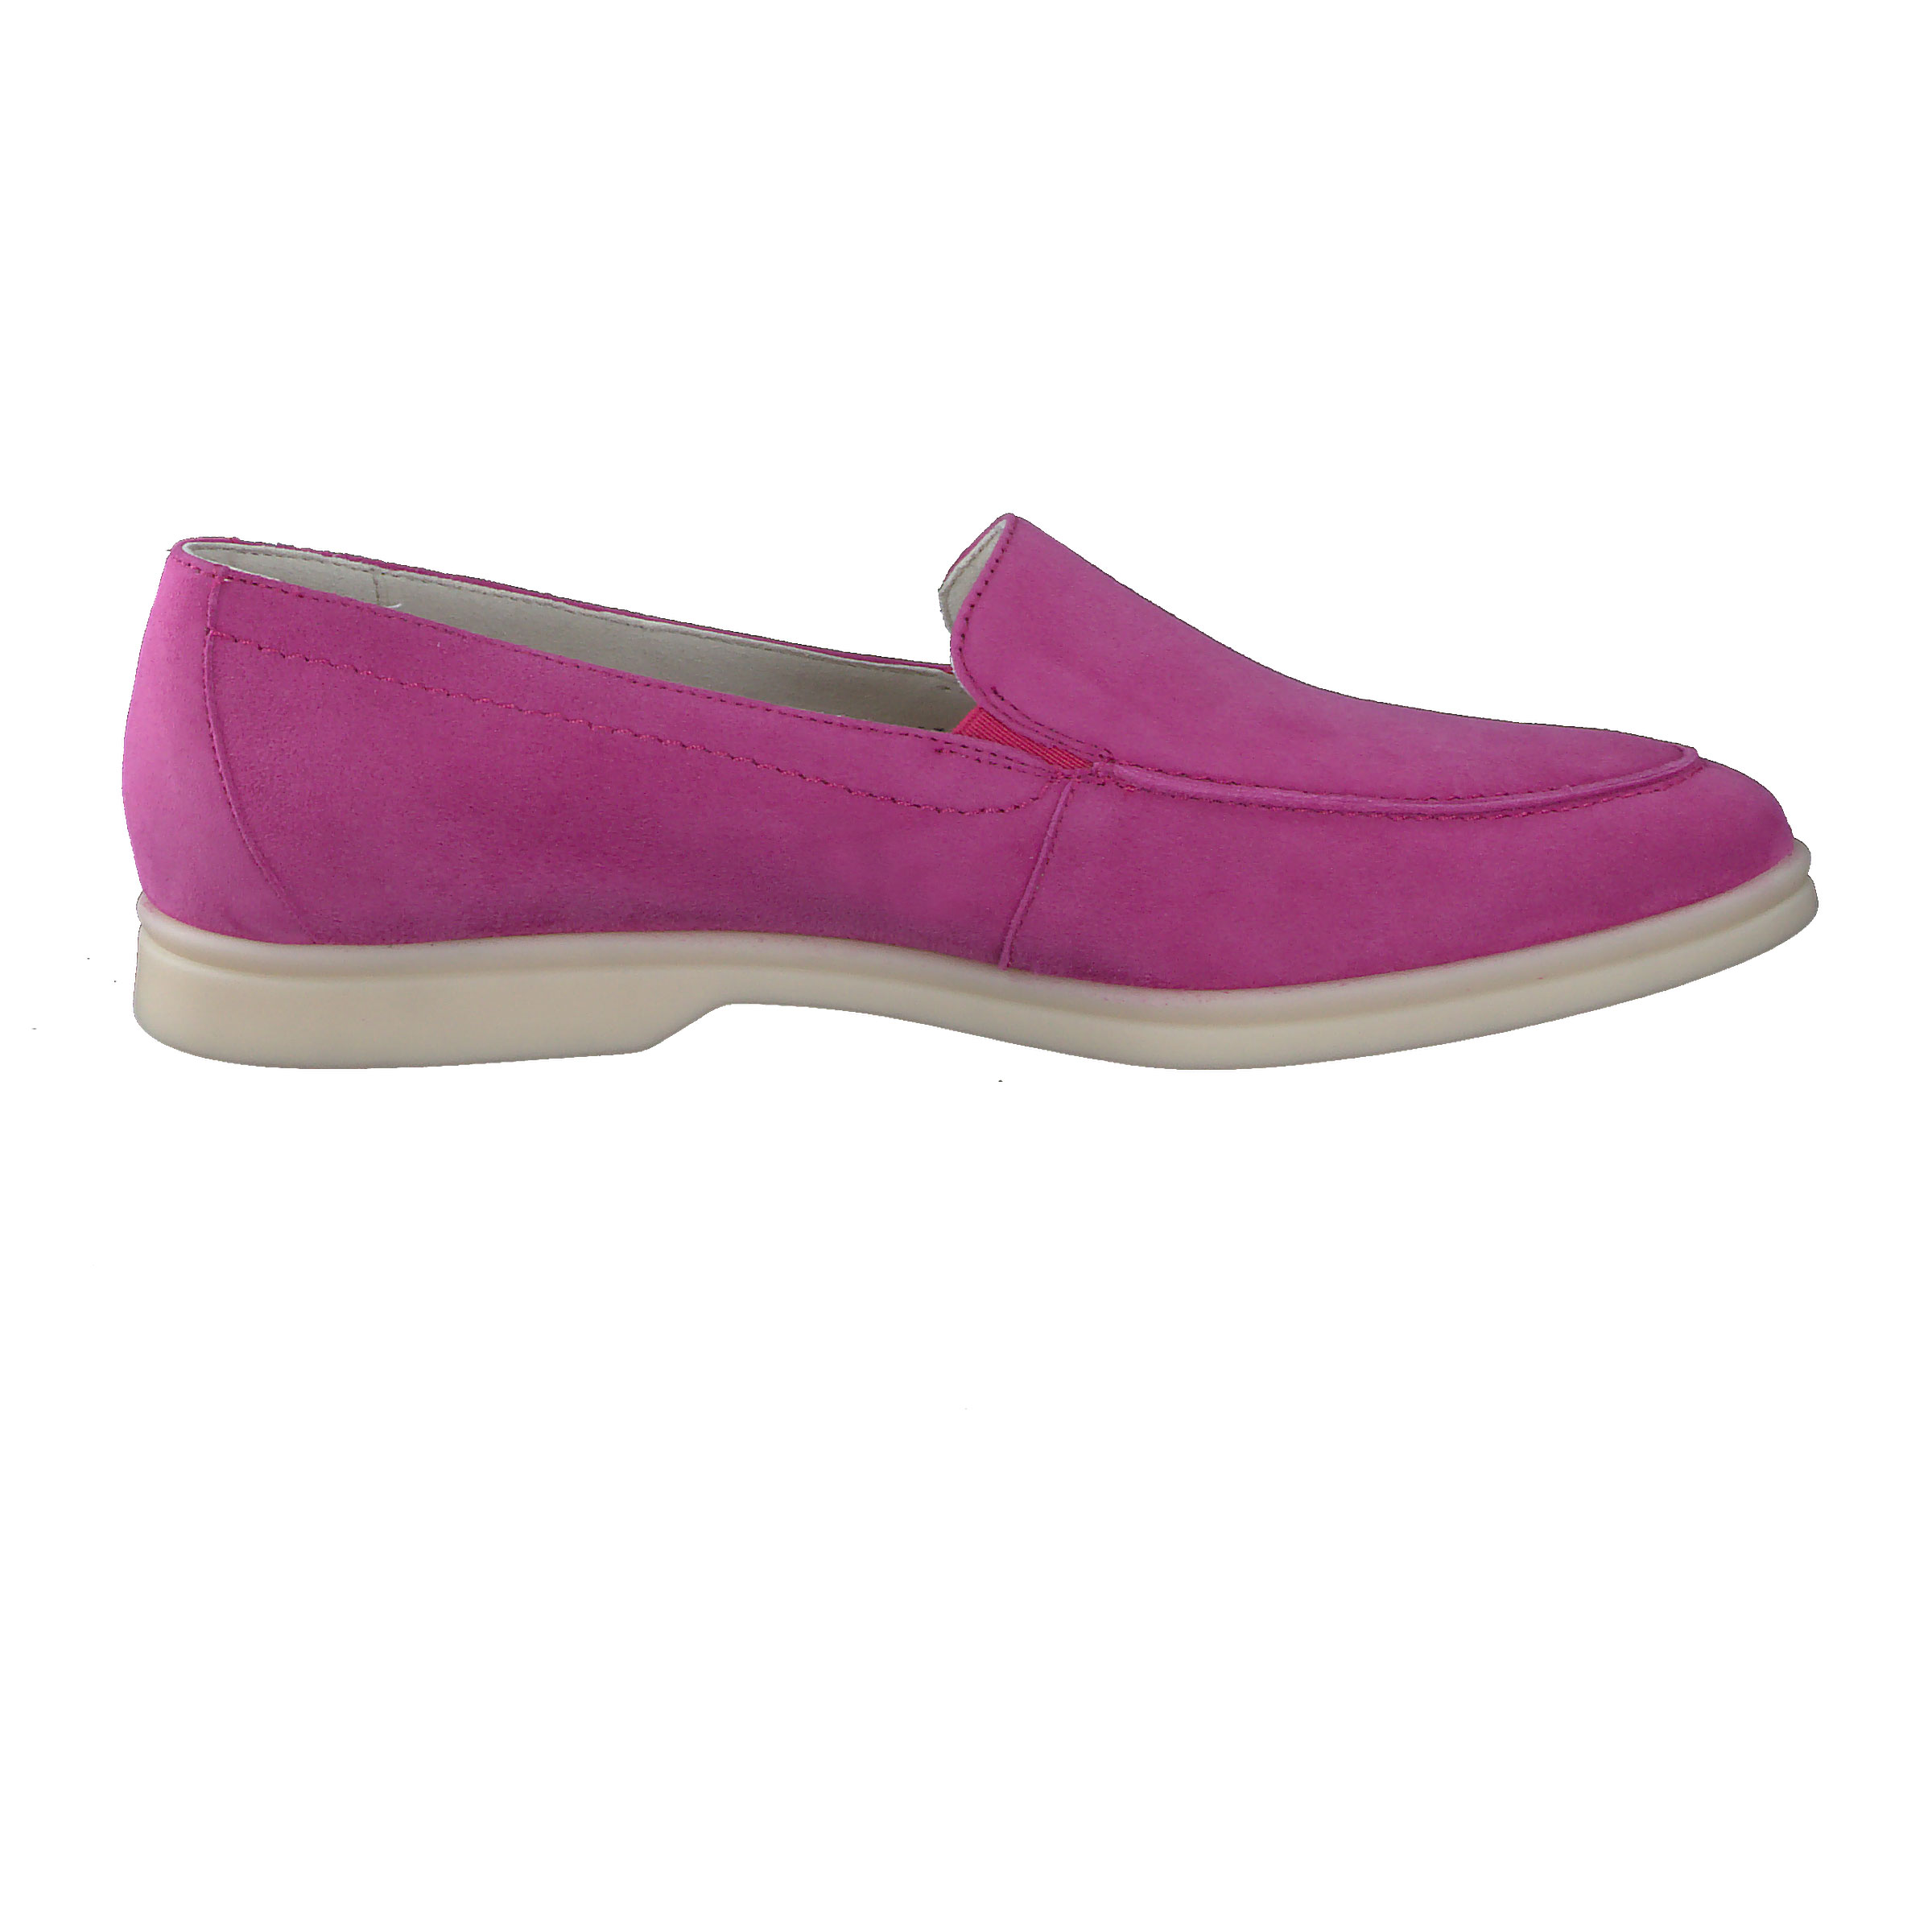 Paul Green Slipper - Pink suede leather